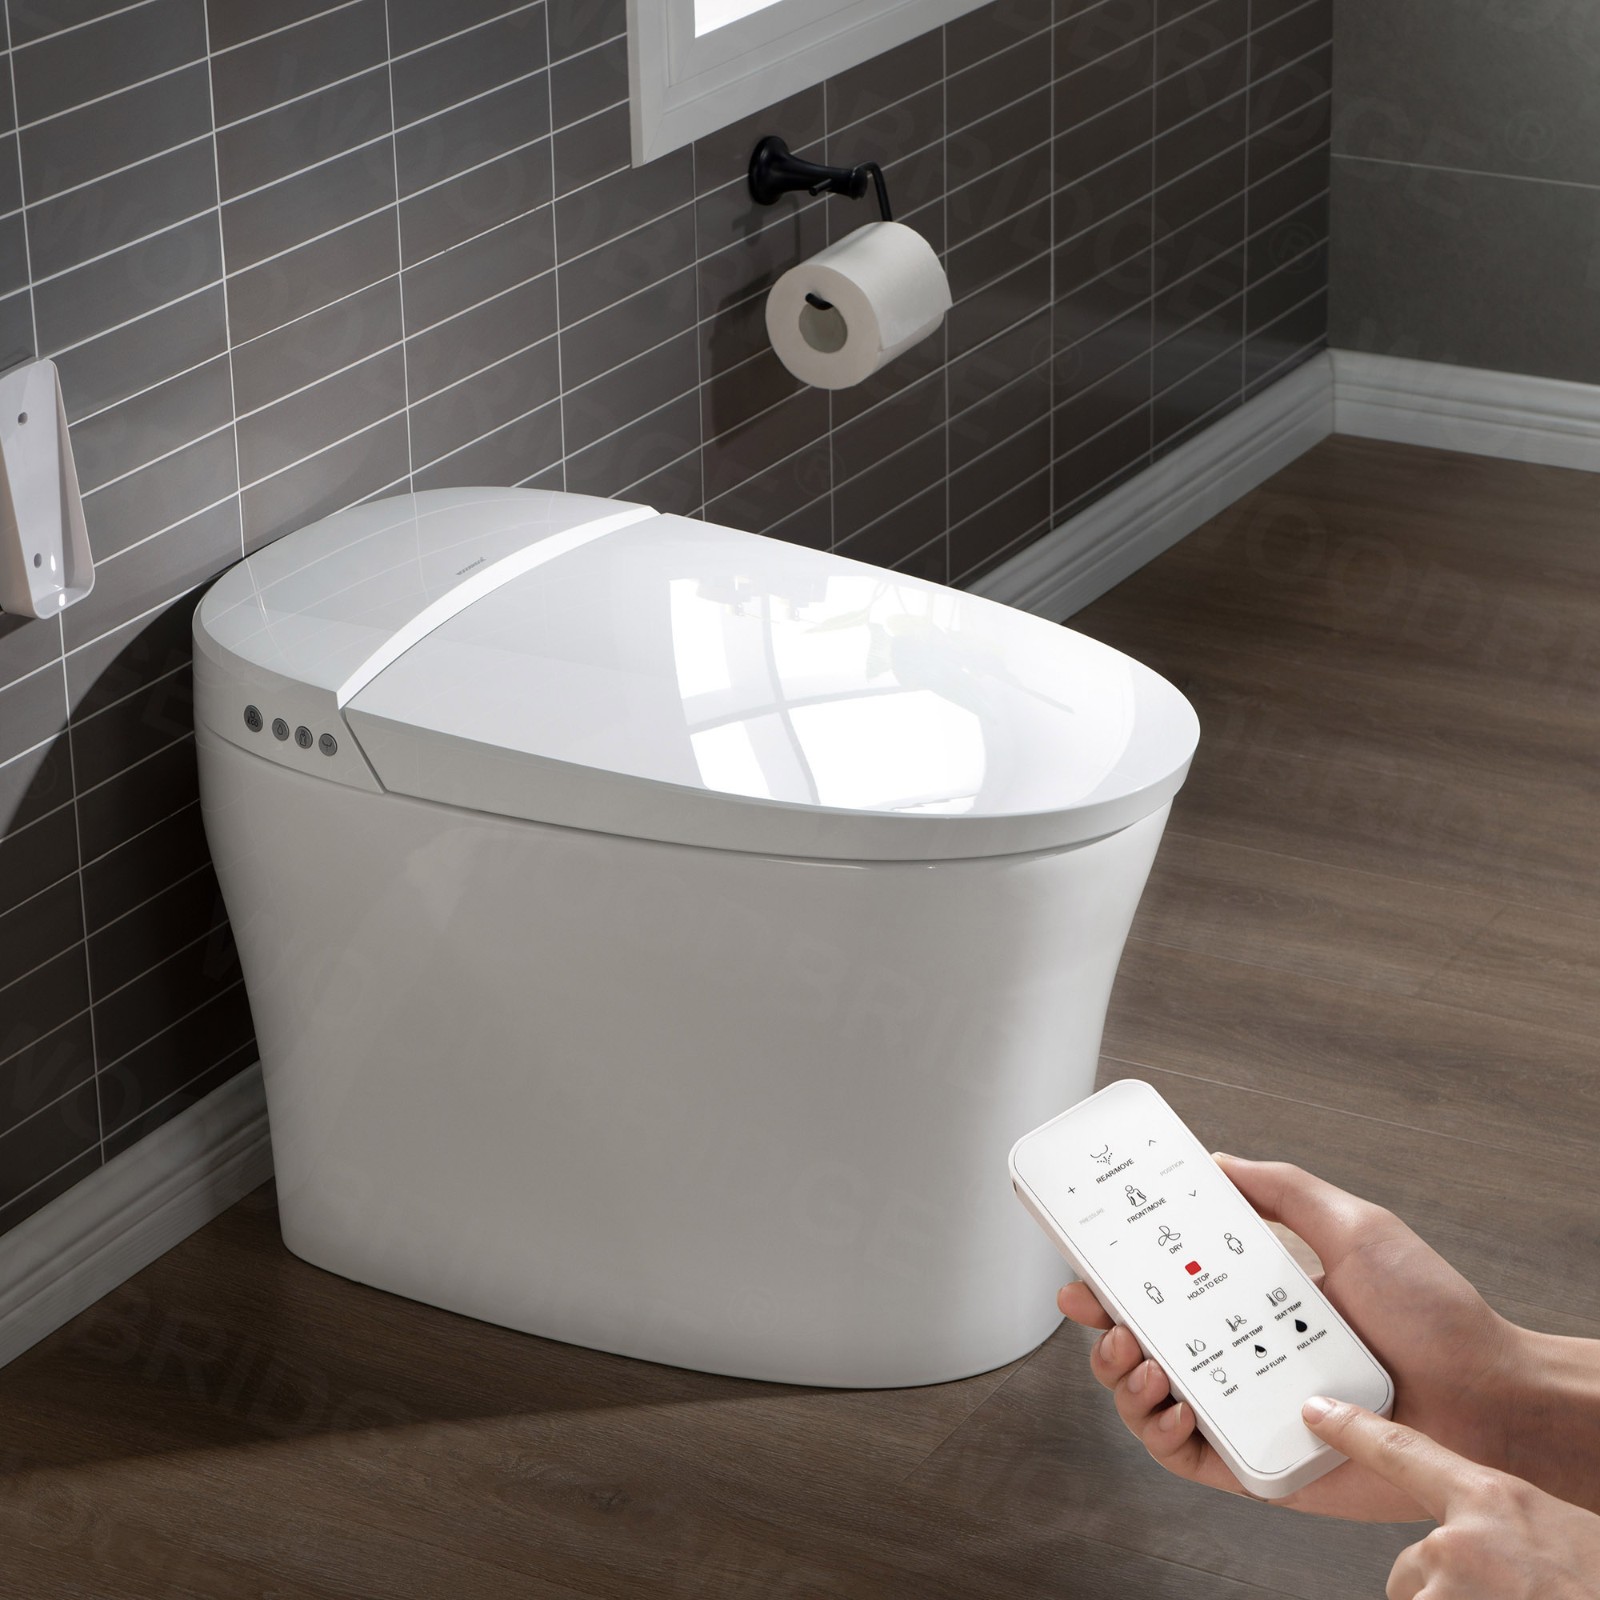  WOODBRIDGE B0970S-1.0(no foot sensor) Smart Bidet Toilet Elongated One Piece Modern Design, Heated Seat with Integrated Multi Function Remote Control, White_8453